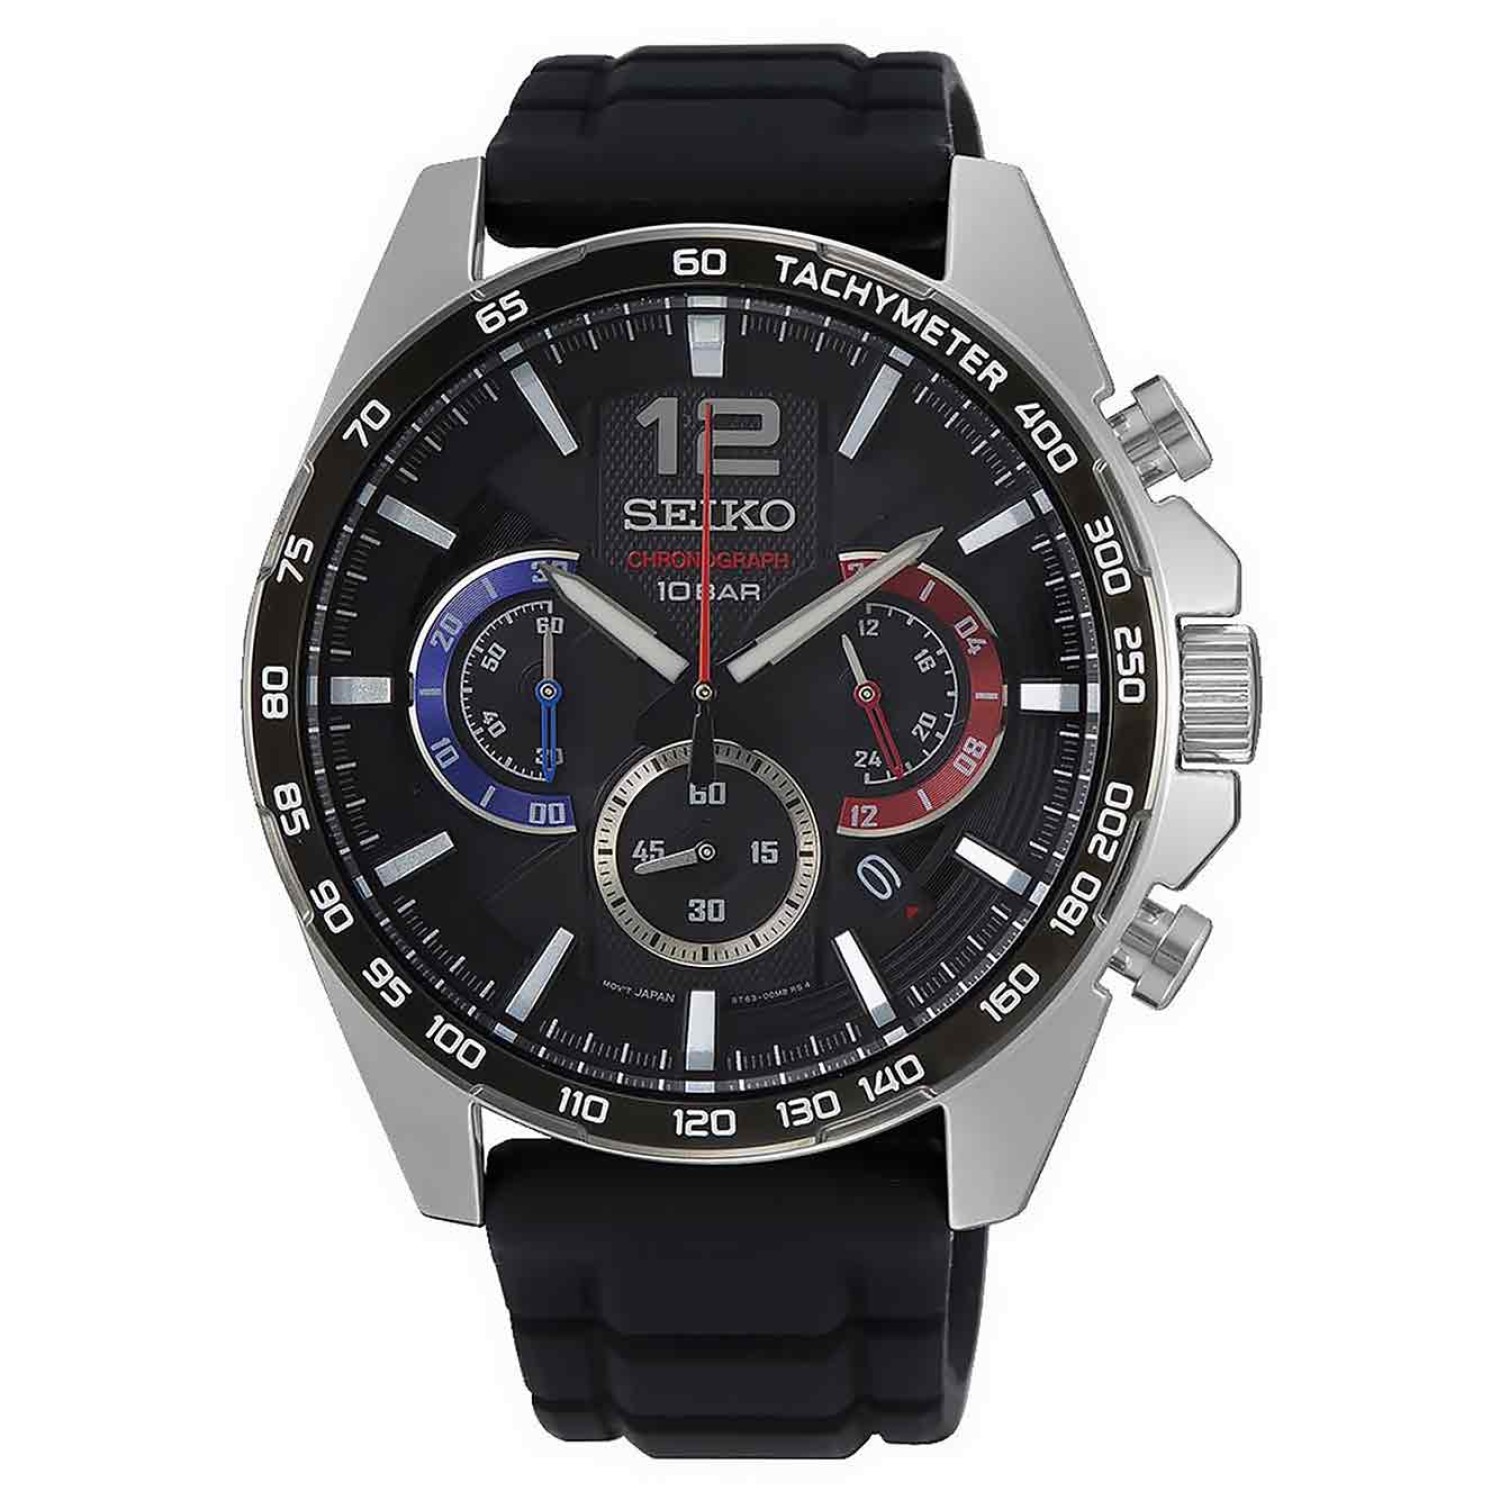 SSB347P SEIKO Chronograph Tachymeter Analog Quartz Watch. Available online or  at your Seiko Watch Specialist  - Christies Papatoetoe and Watch Station Manukau.   3 Months No Payments and Interest for Q Card holders LAYBUY - Pay it easy, in 6 weekl @chris